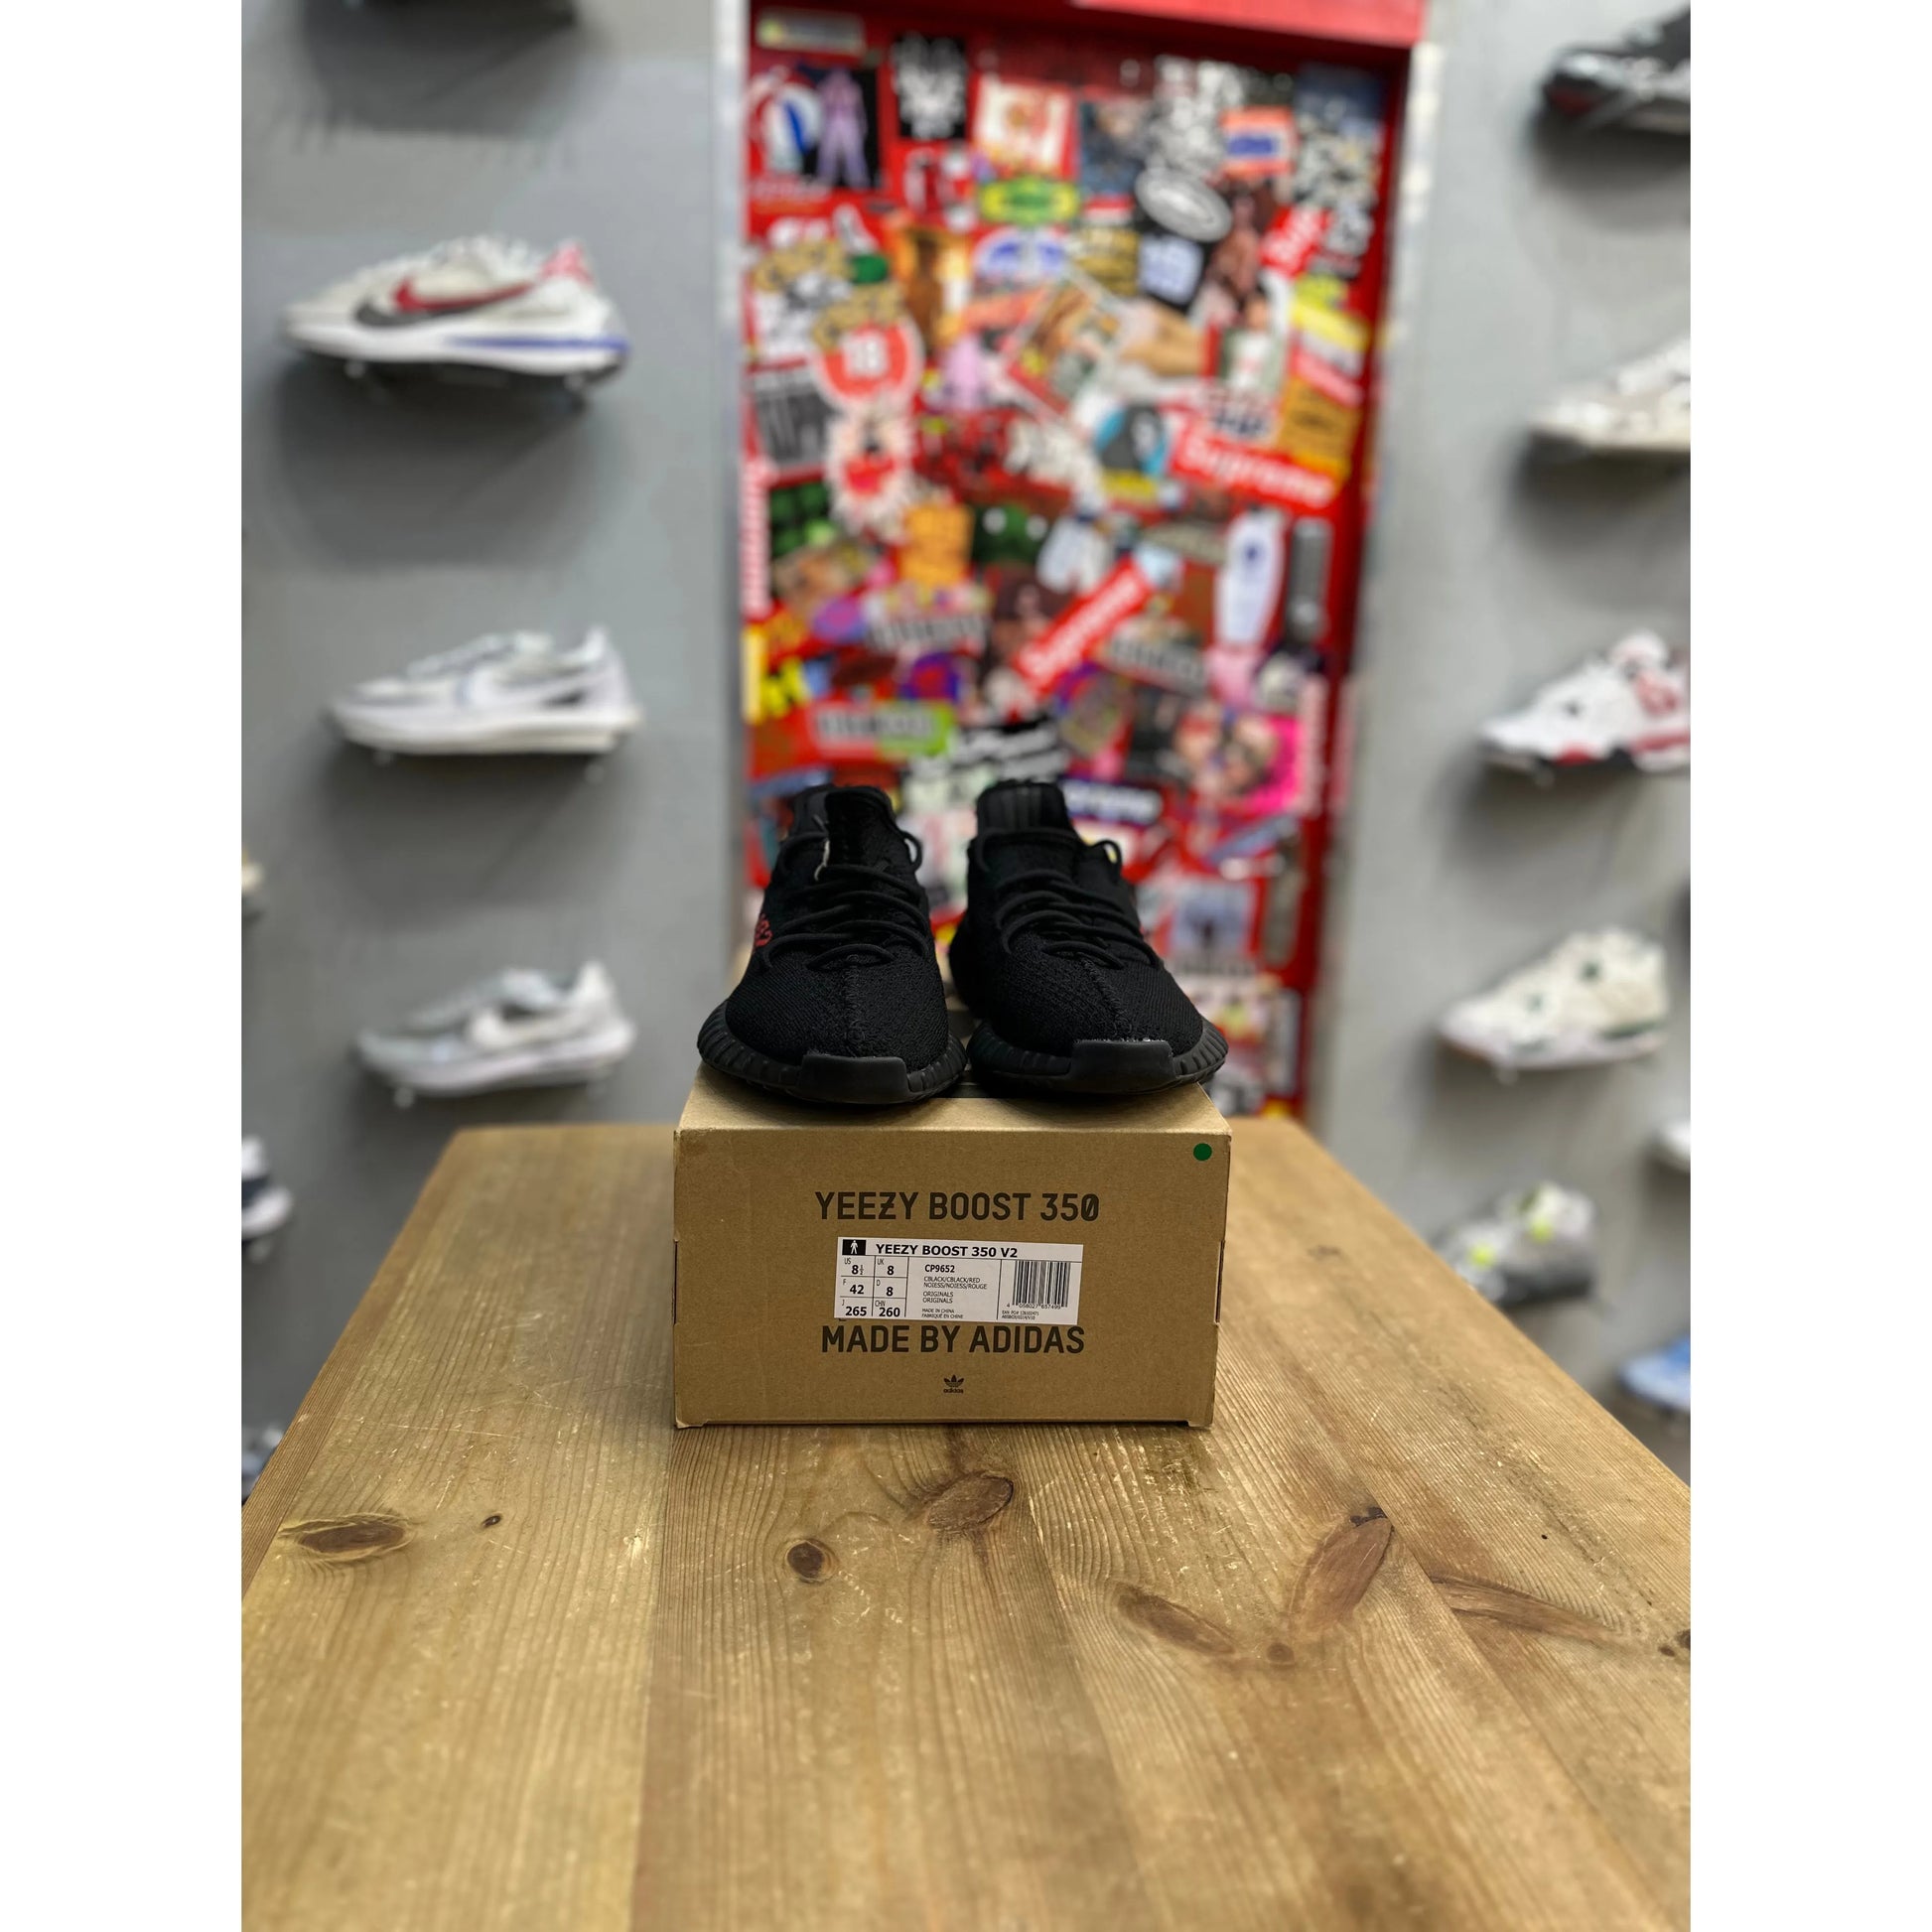 Adidas Yeezy Boost 350 V2 Black Red UK 8 by Yeezy from £265.00